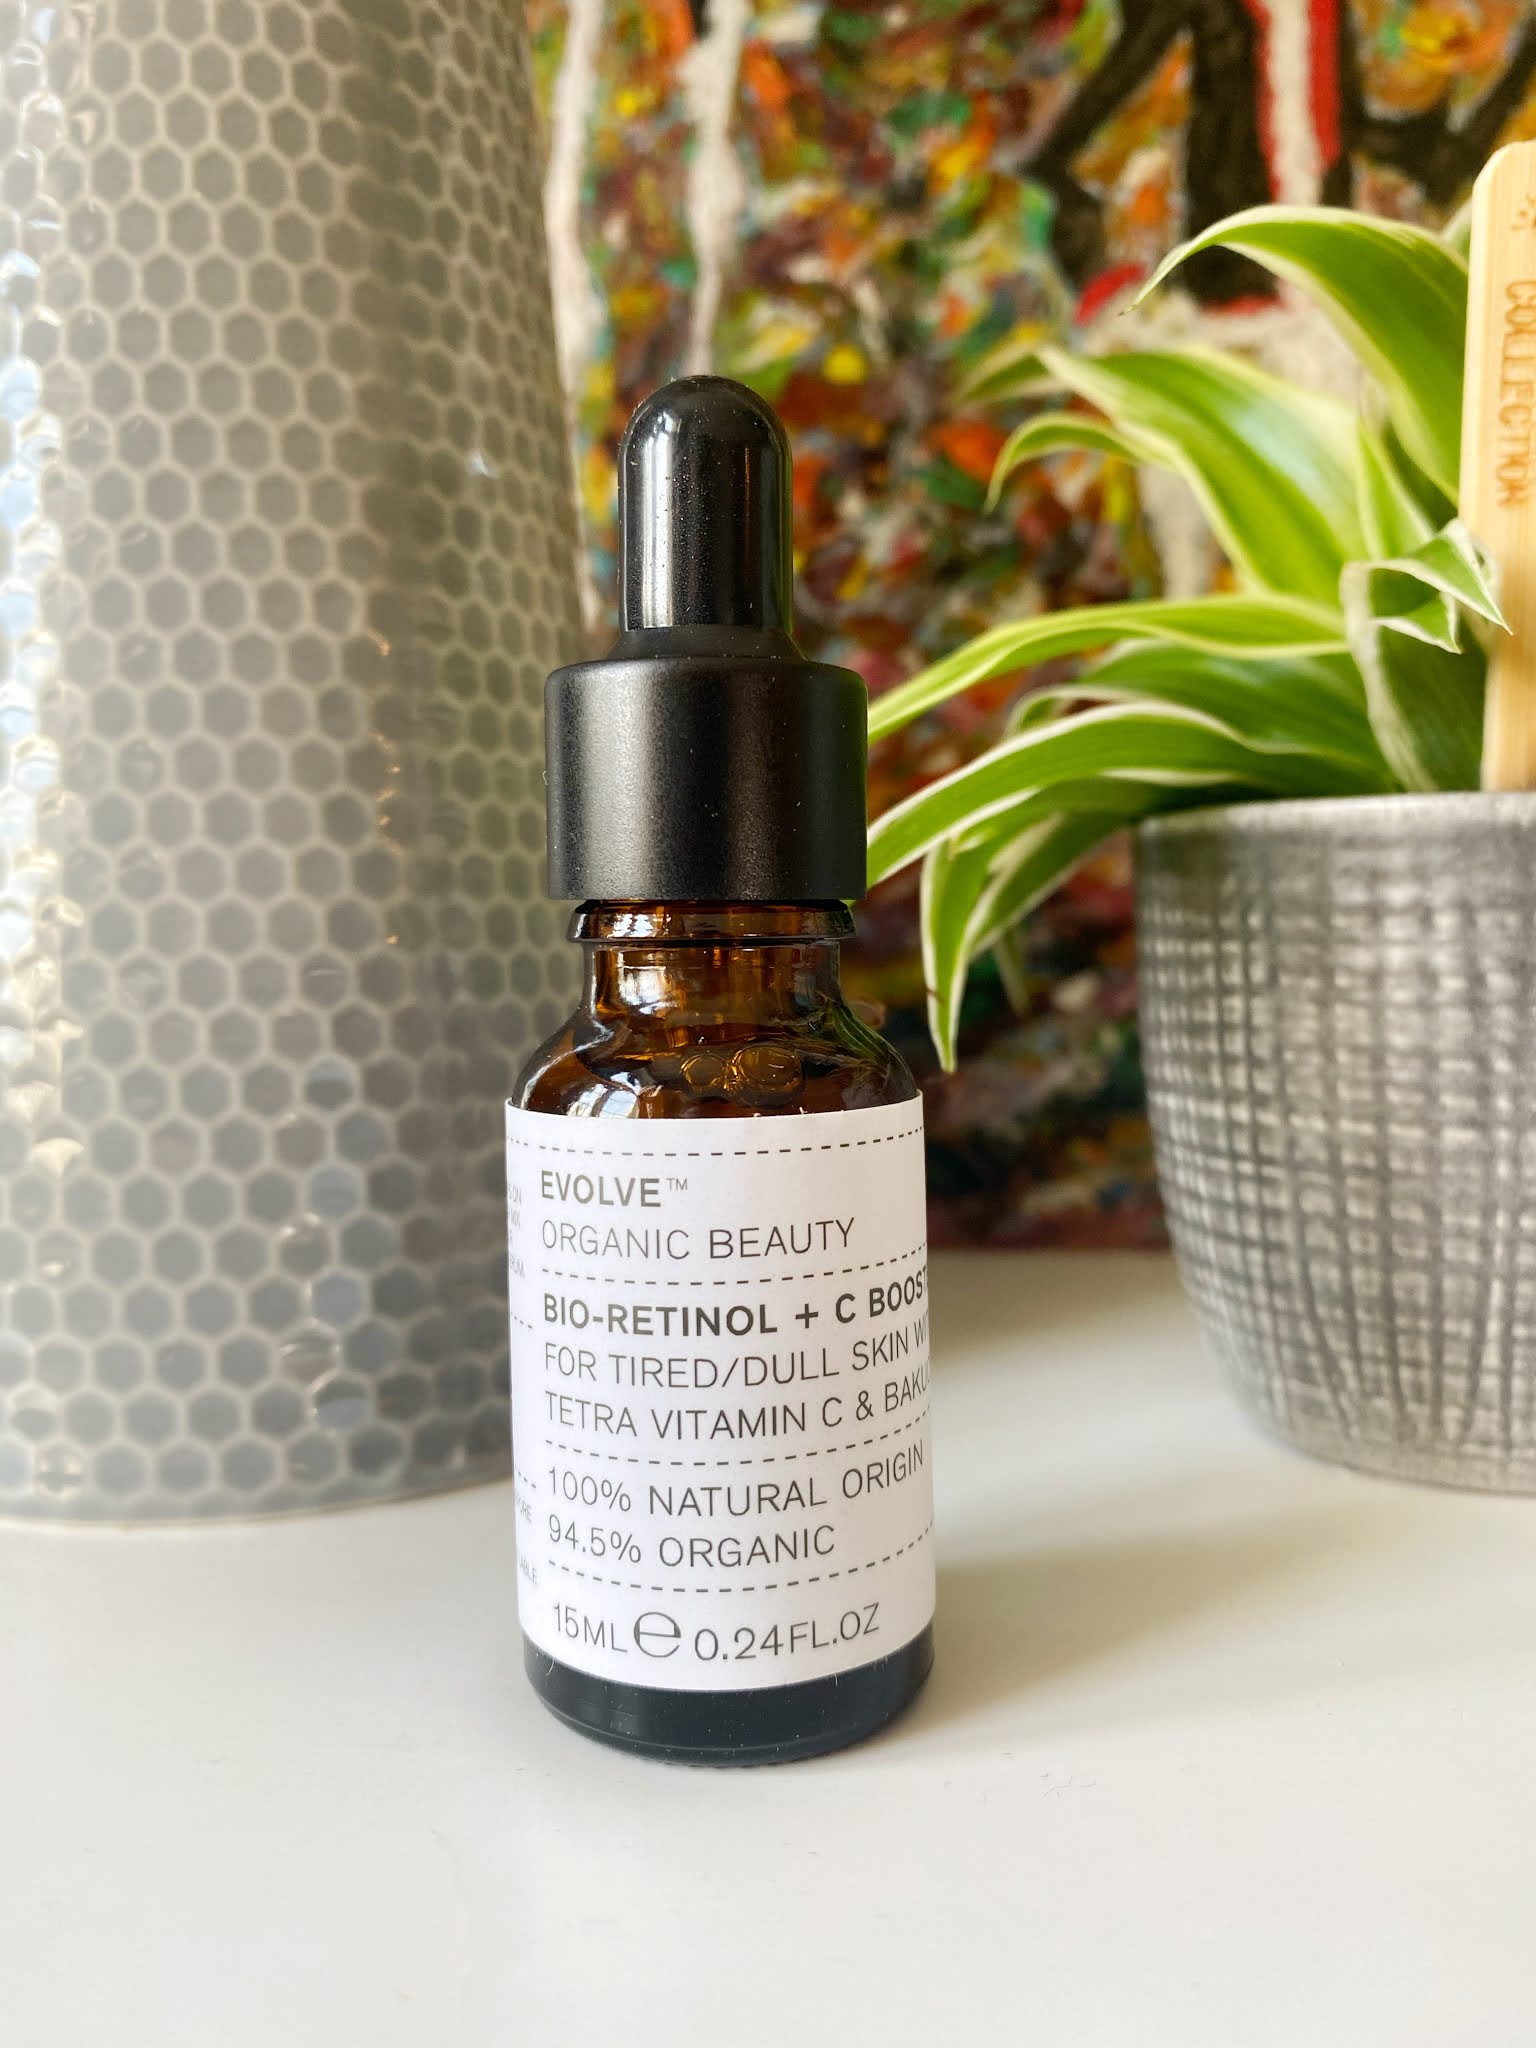 Beautyqueenuk | A UK Beauty and Lifestyle Blog: Evolve Organic Beauty ...